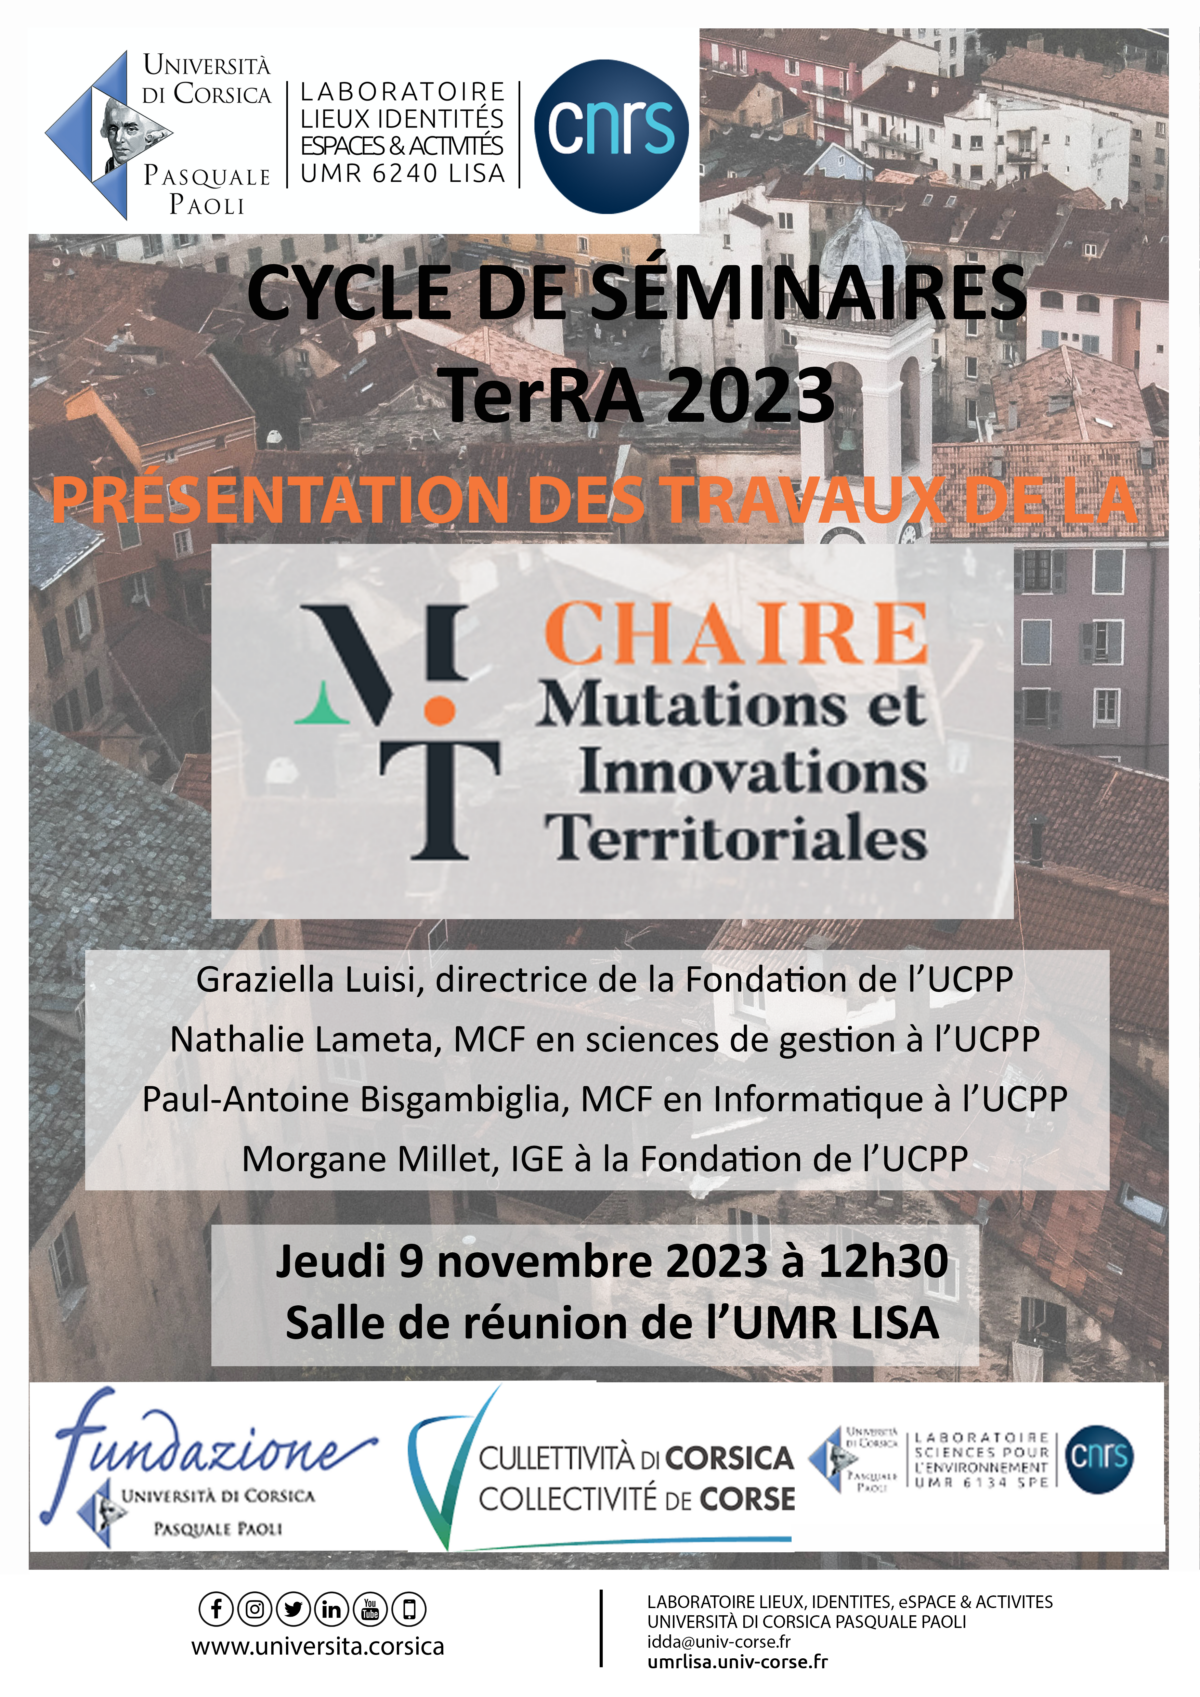 Chaire Mutations et Innovations Territoriales